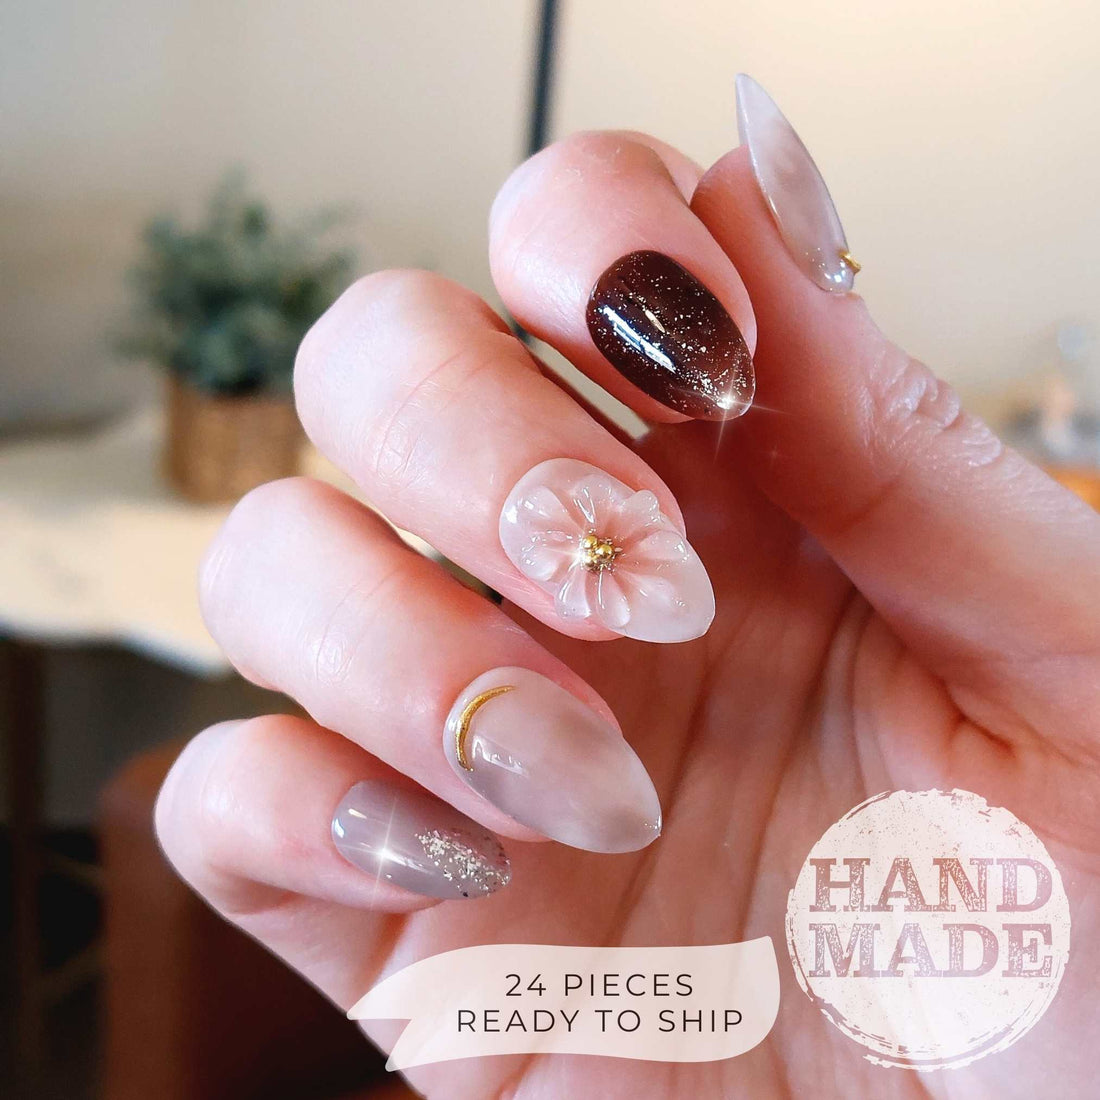 Spring floral press on nails with light pink 3d flowers, jelly gel, brown glitter accents, gold chrome details and silver glitter. Handmade press on nails from FancyB Nails show in short almond.